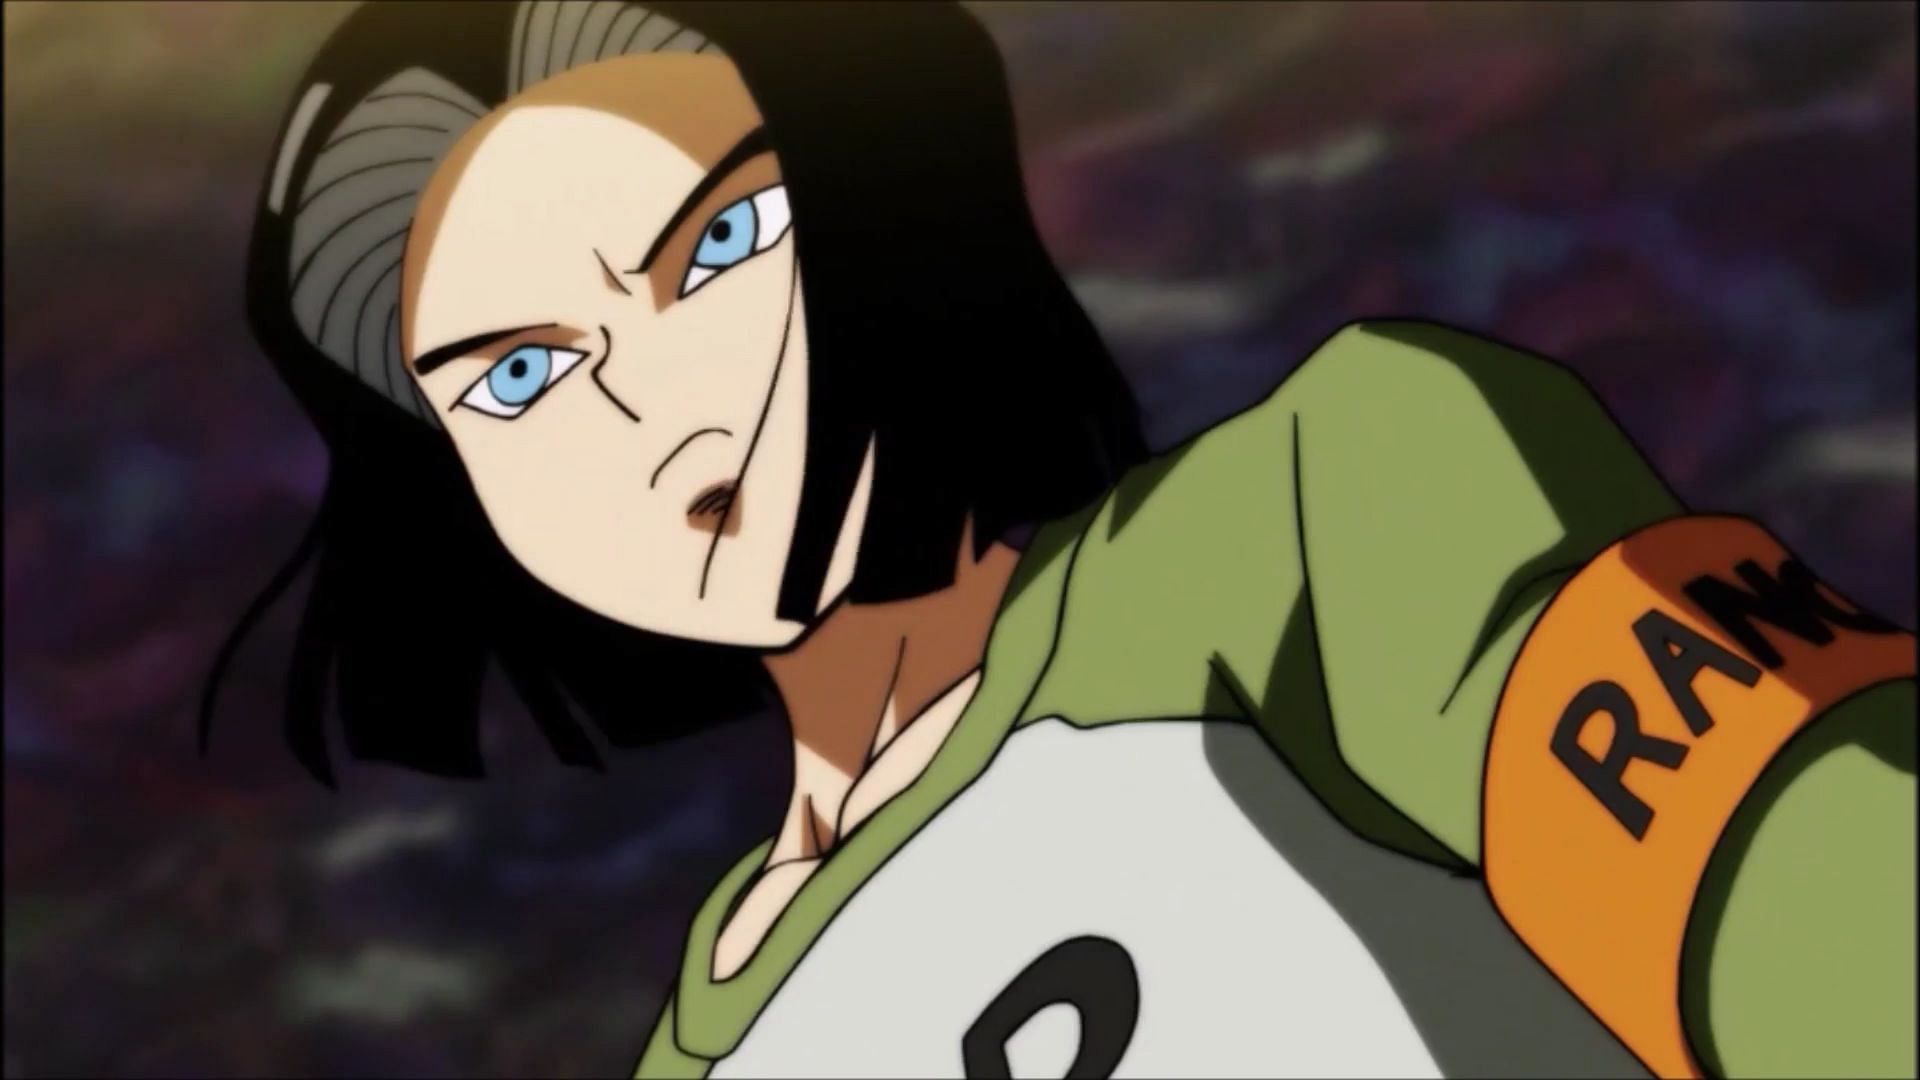 Android 17 during the Tournament of Power (Image via Toei Animation)